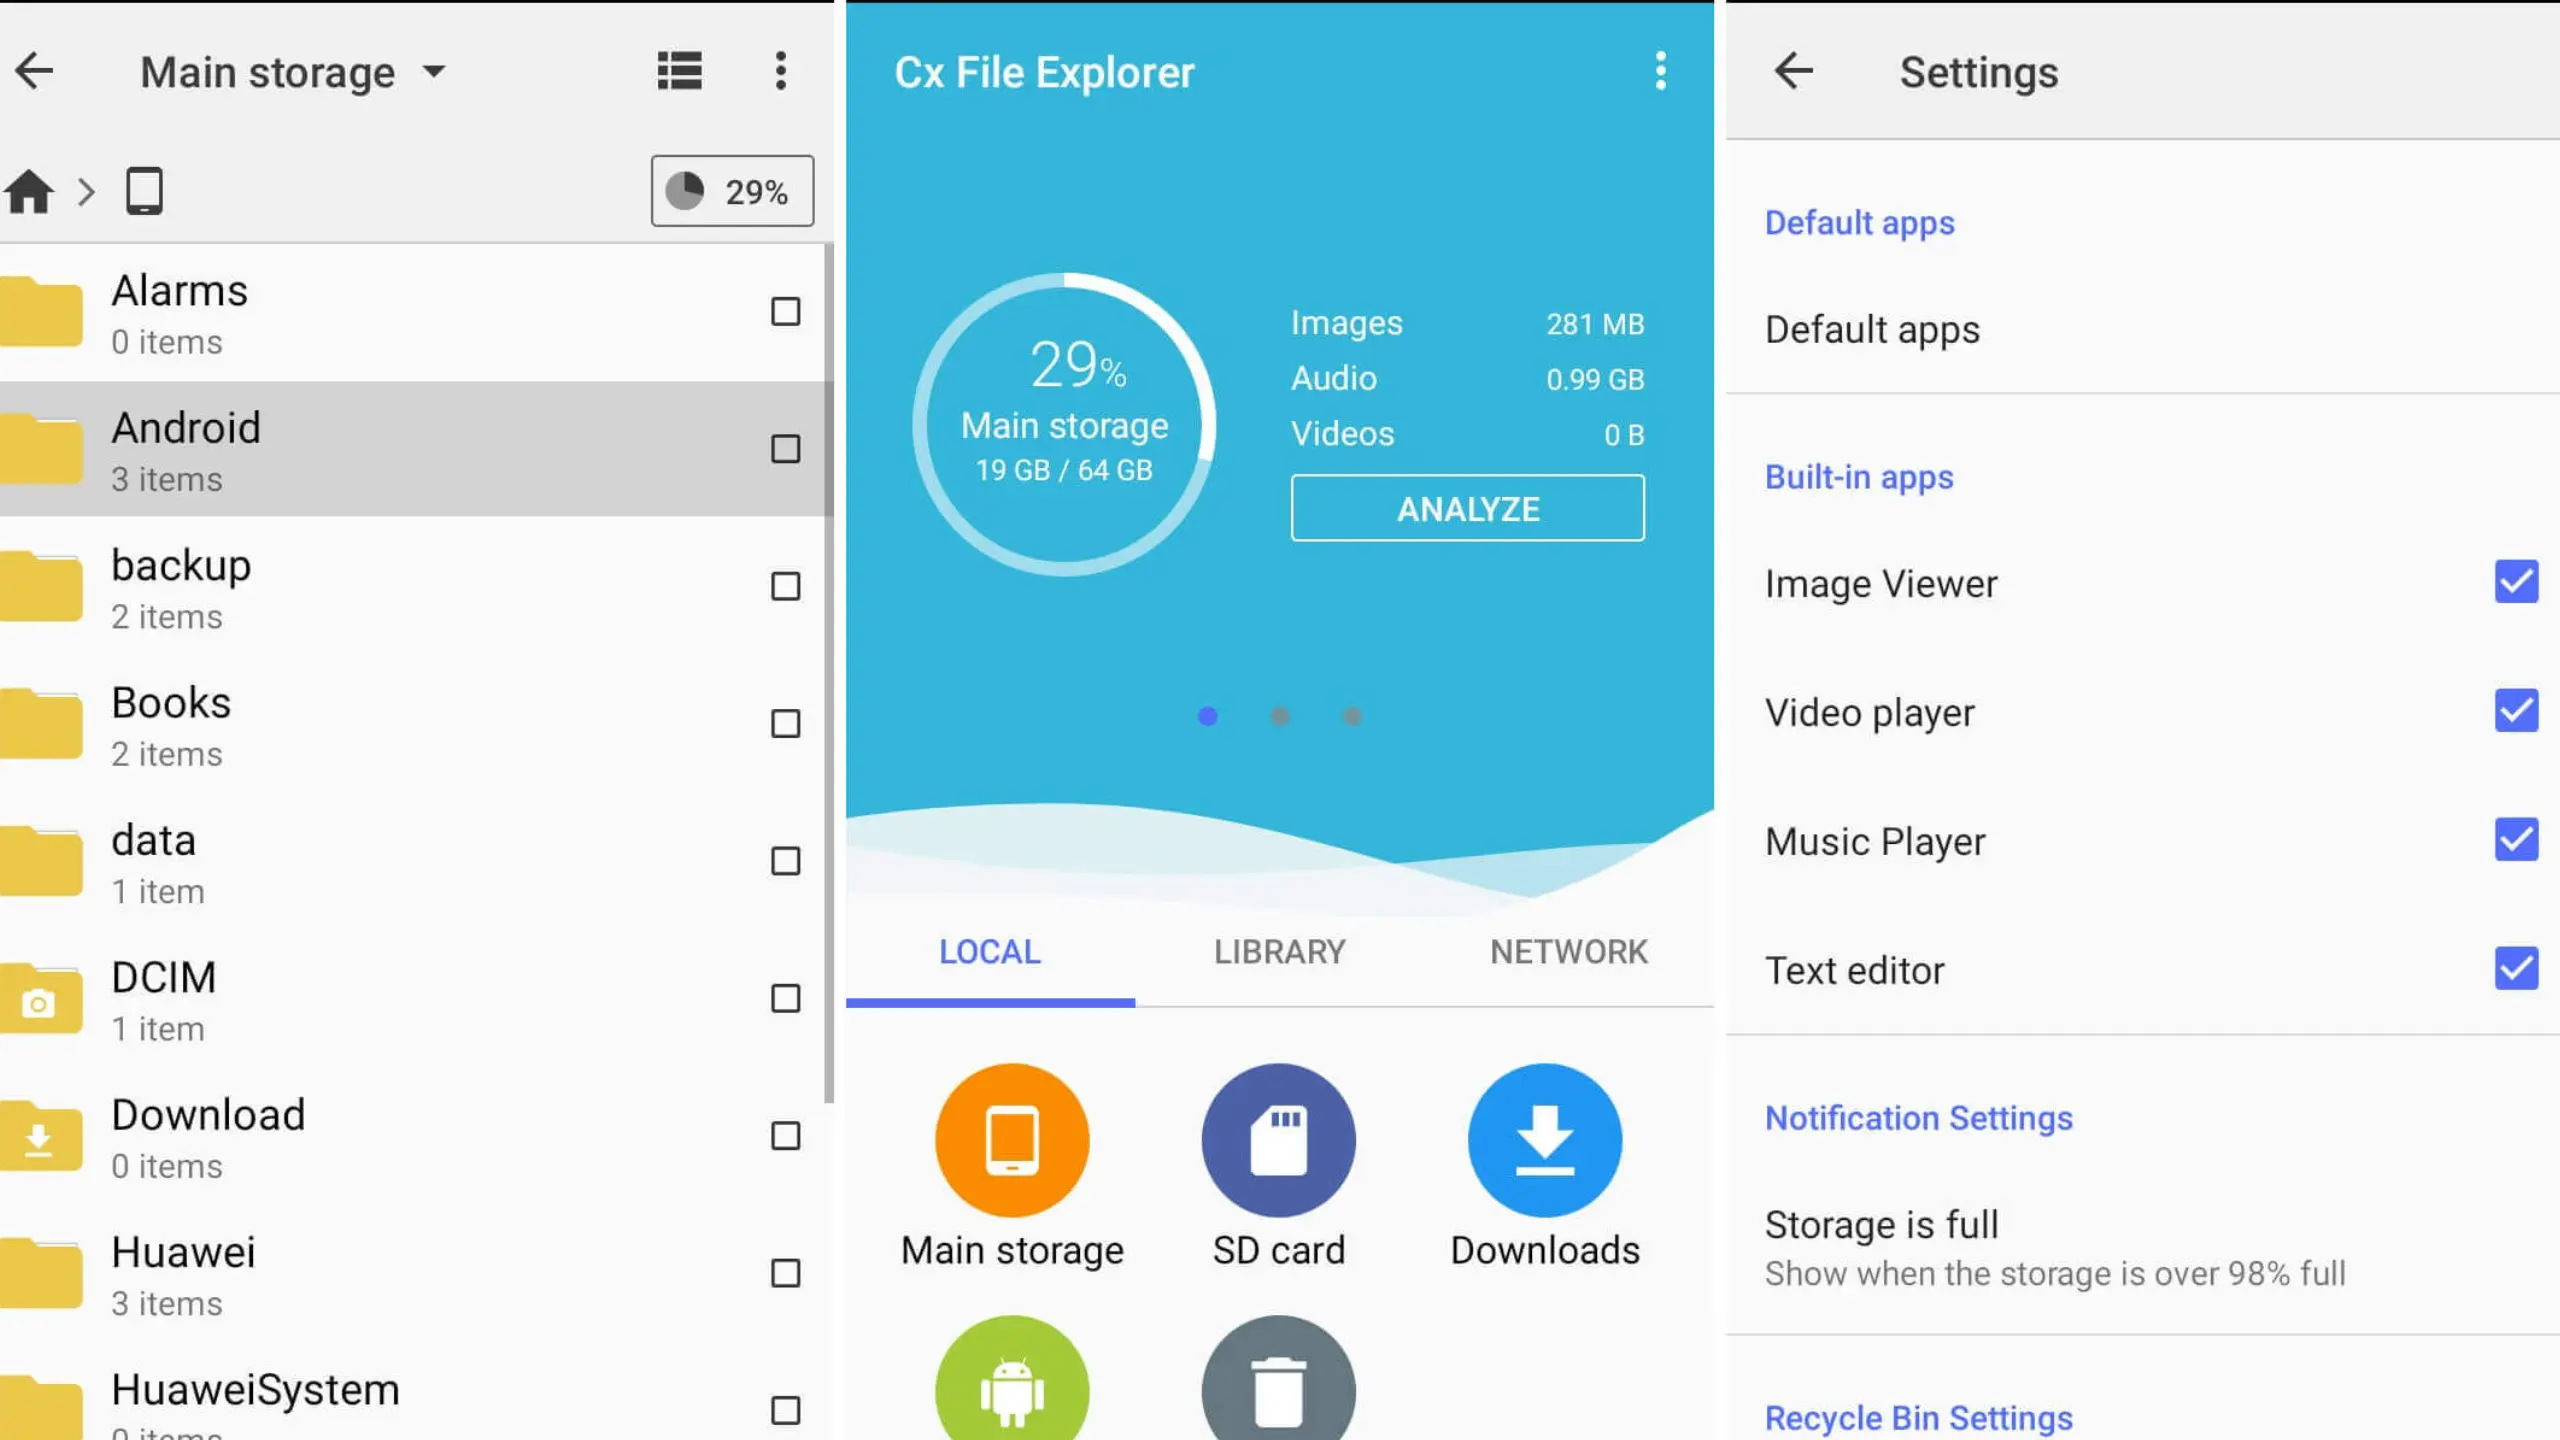 Cx File Explorer: A Powerful and User-Friendly File Manager for Android